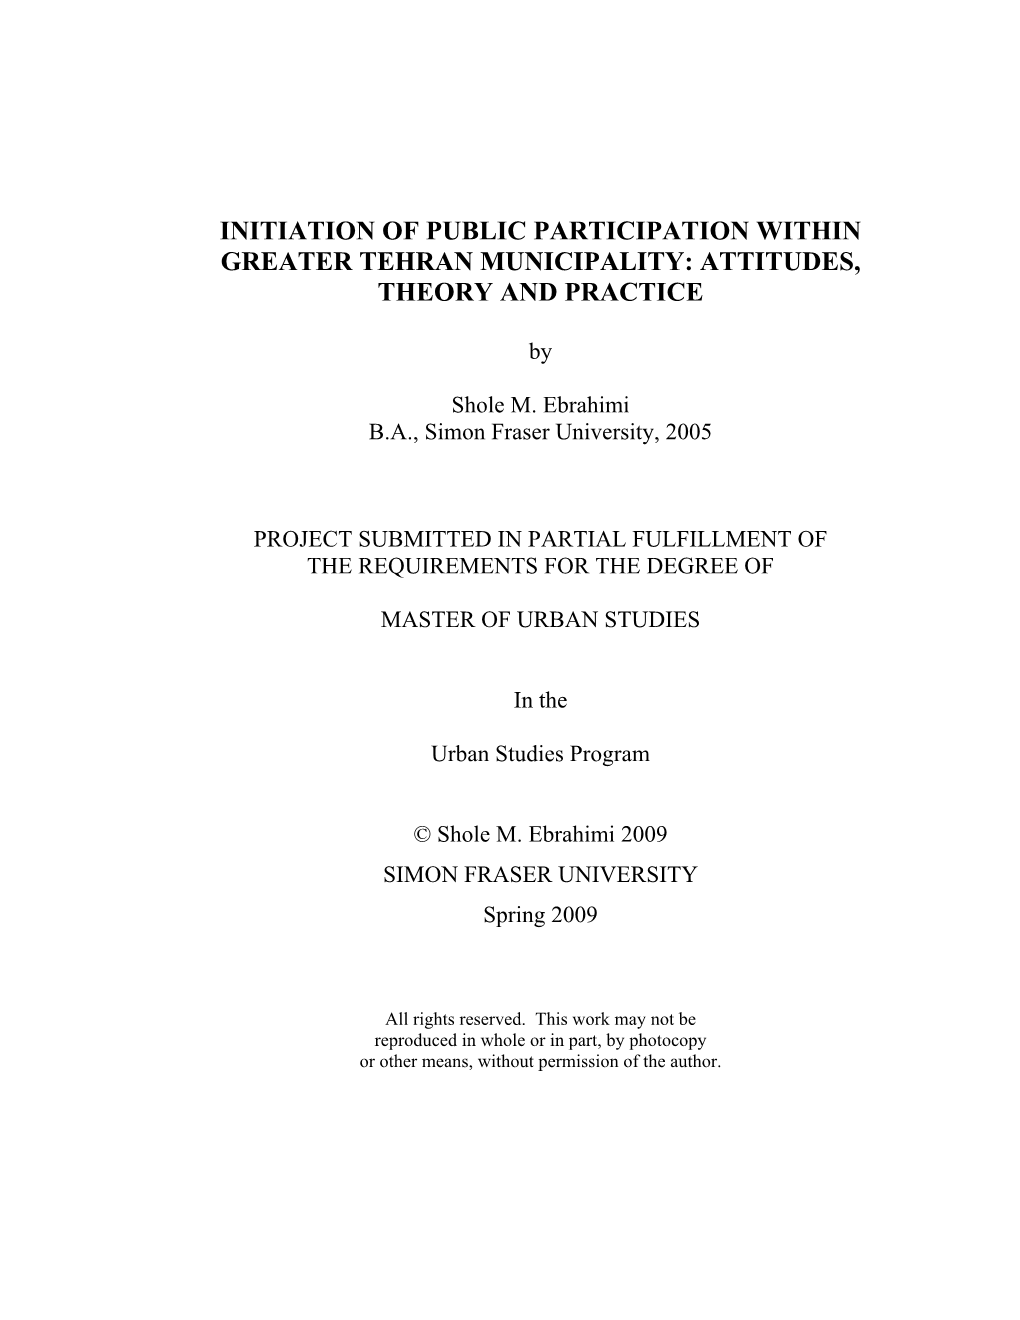 Initiation of Public Participation Within Greater Tehran Municipality: Attitudes, Theory and Practice